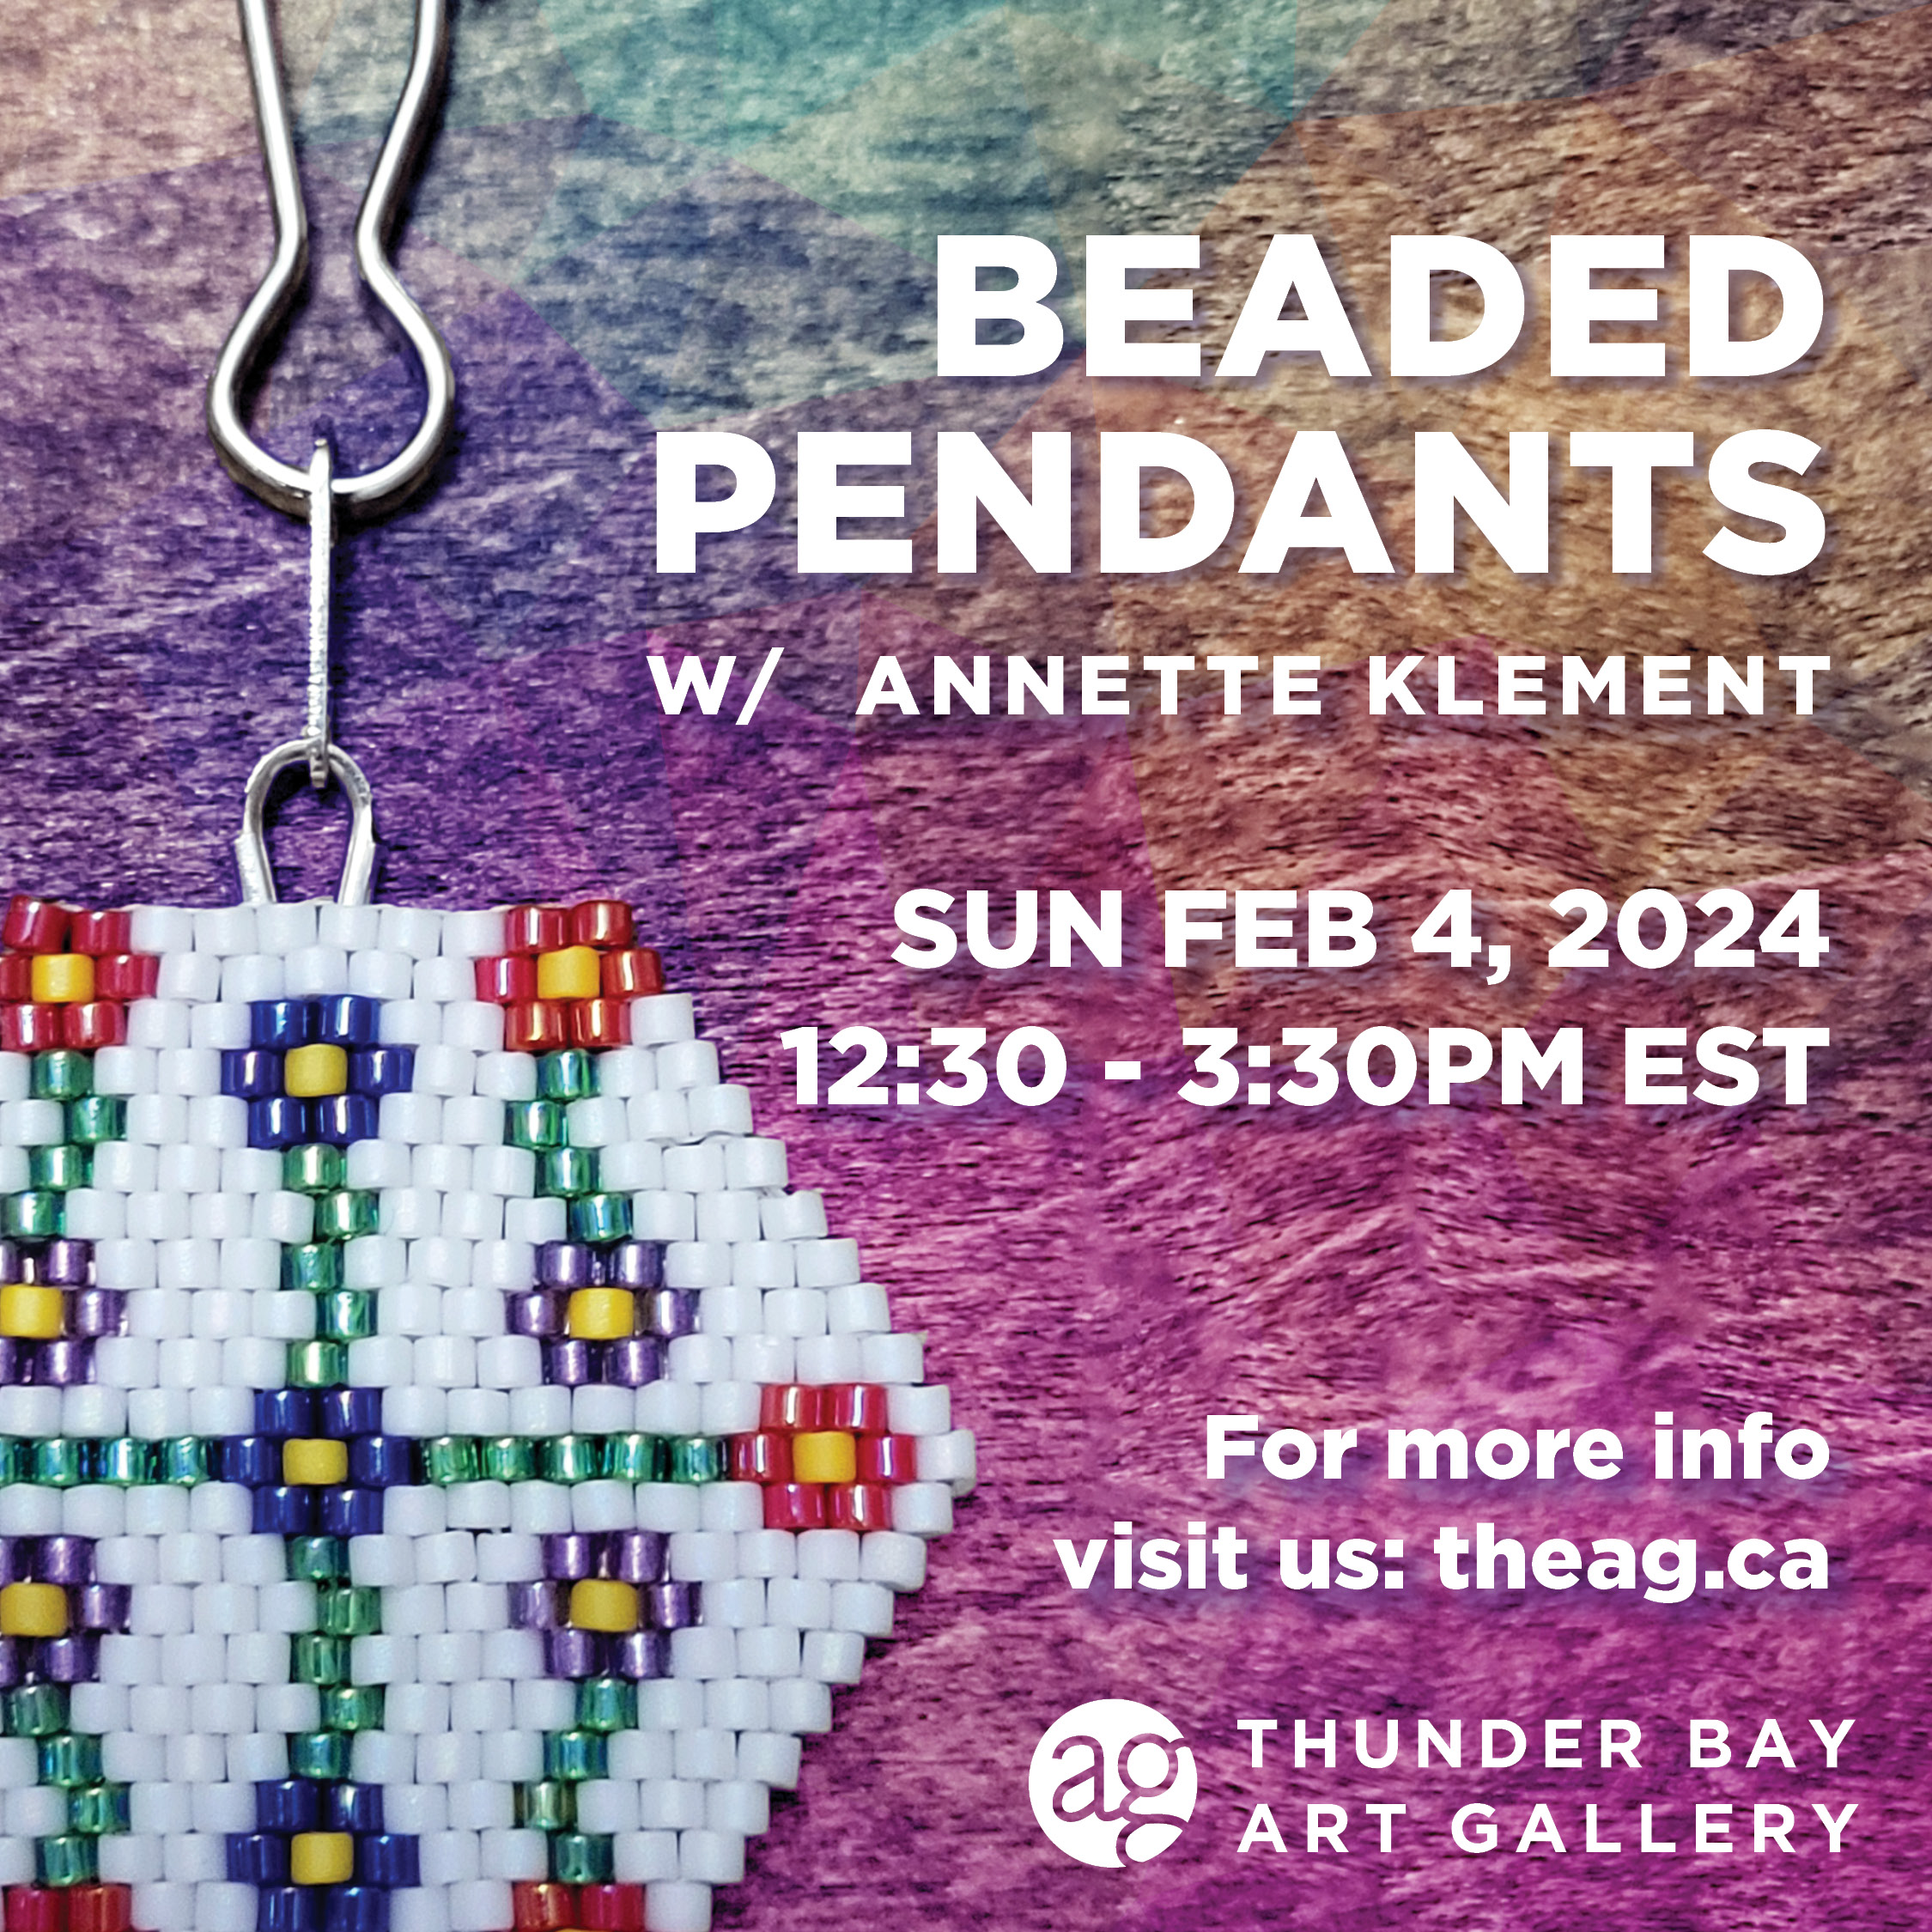 Beaded Pendants with Annette Klement